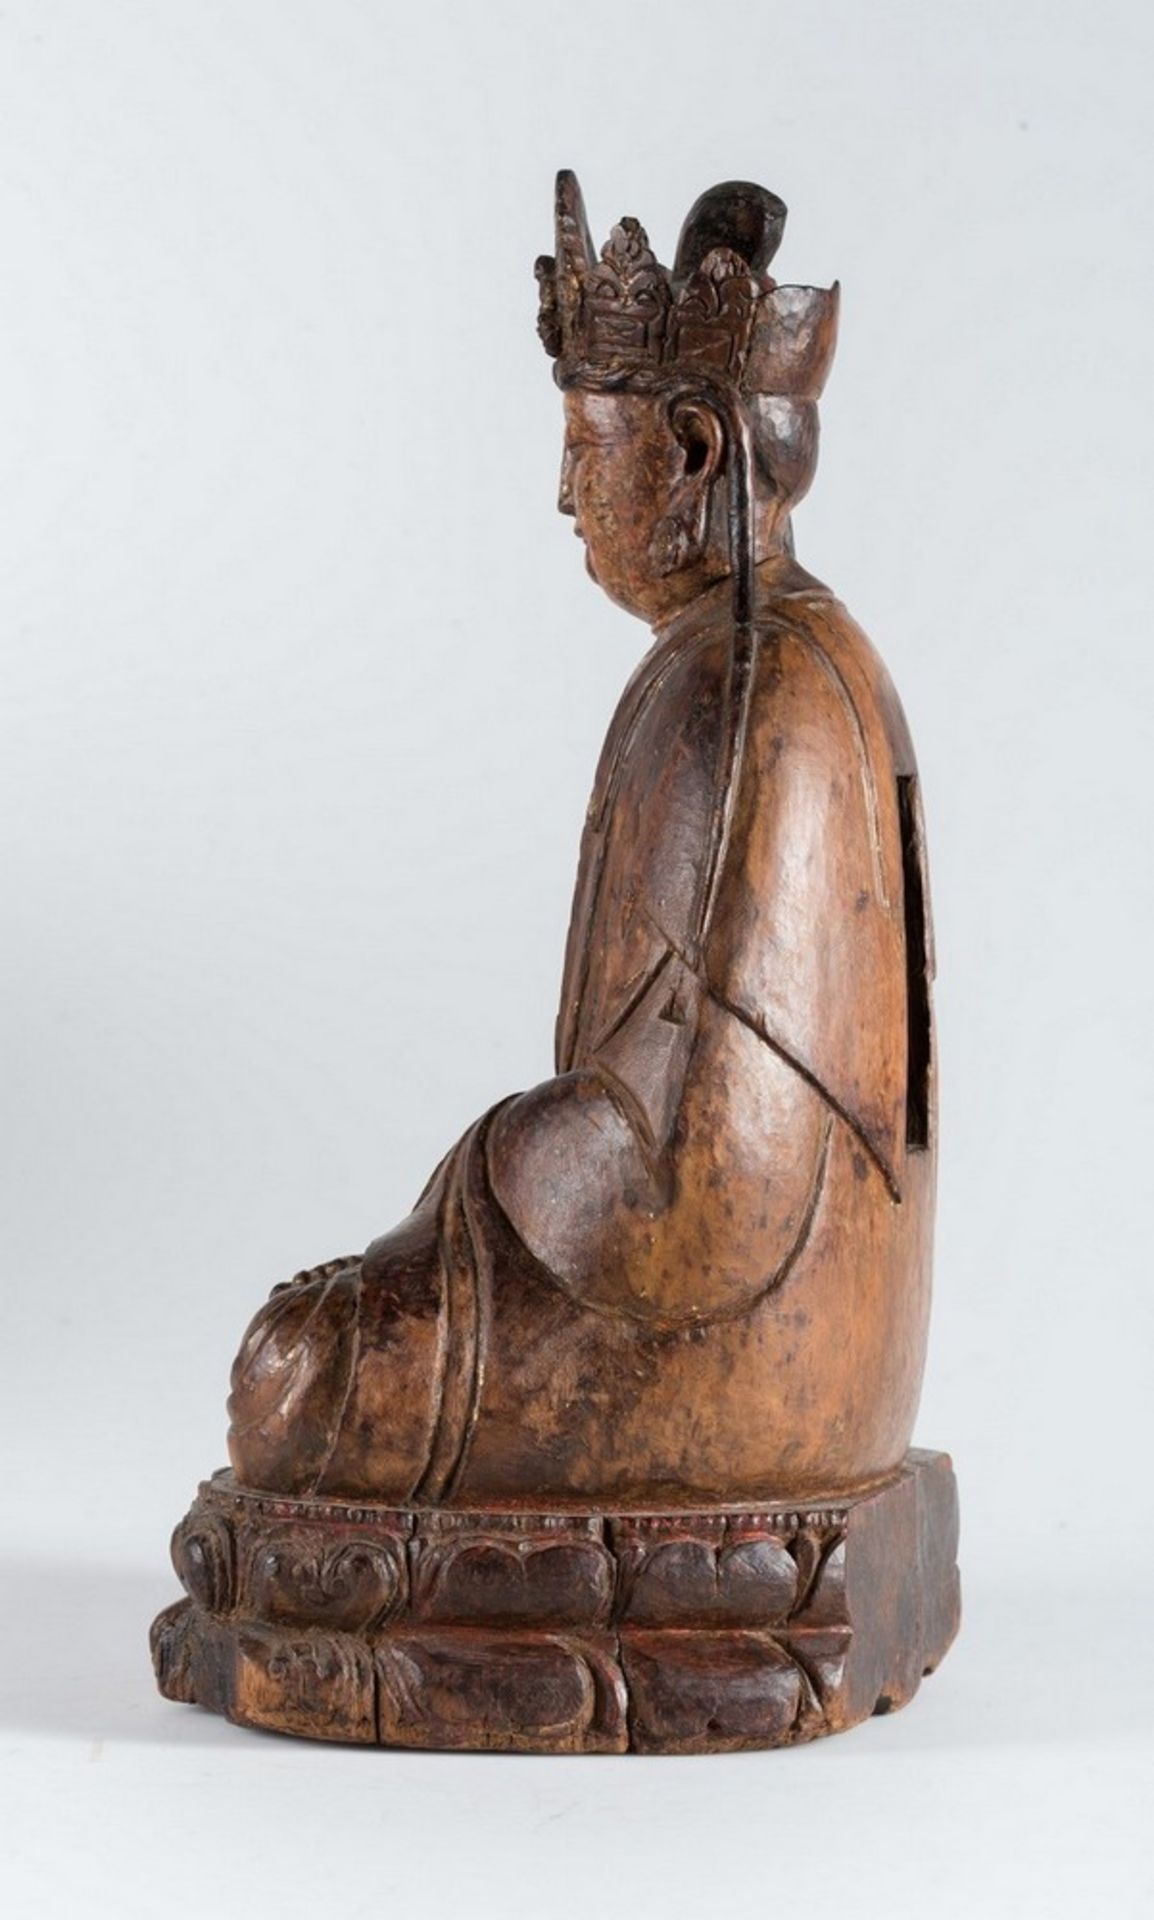 Arte Cinese A hardwood sculpture of Guanyin China, Yuan dynasty, 1279 - 1368. - Image 6 of 7